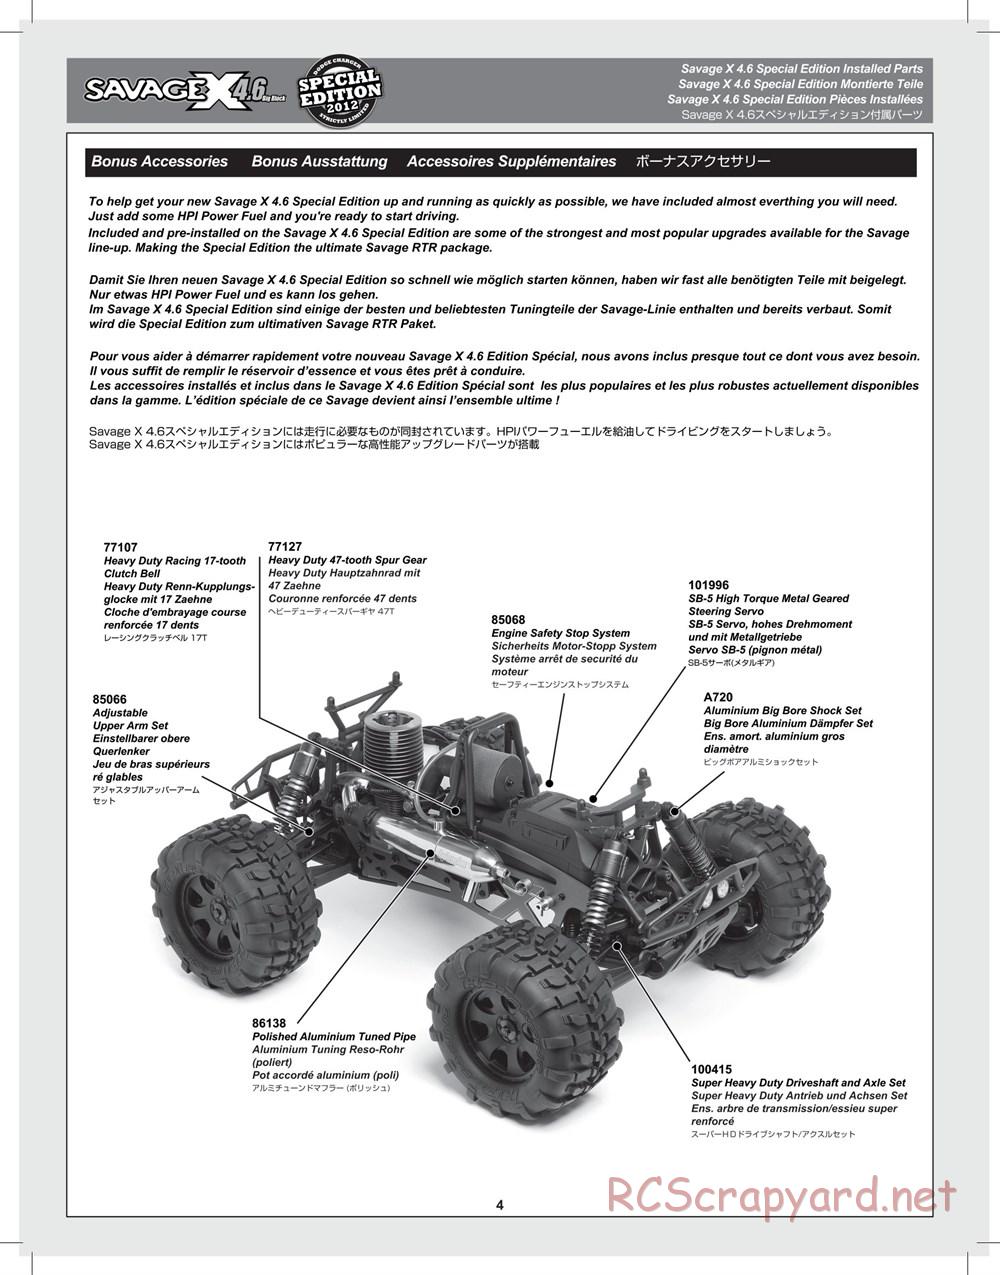 HPI - Savage X 4.6 Special Edition - Supplement - Page 4